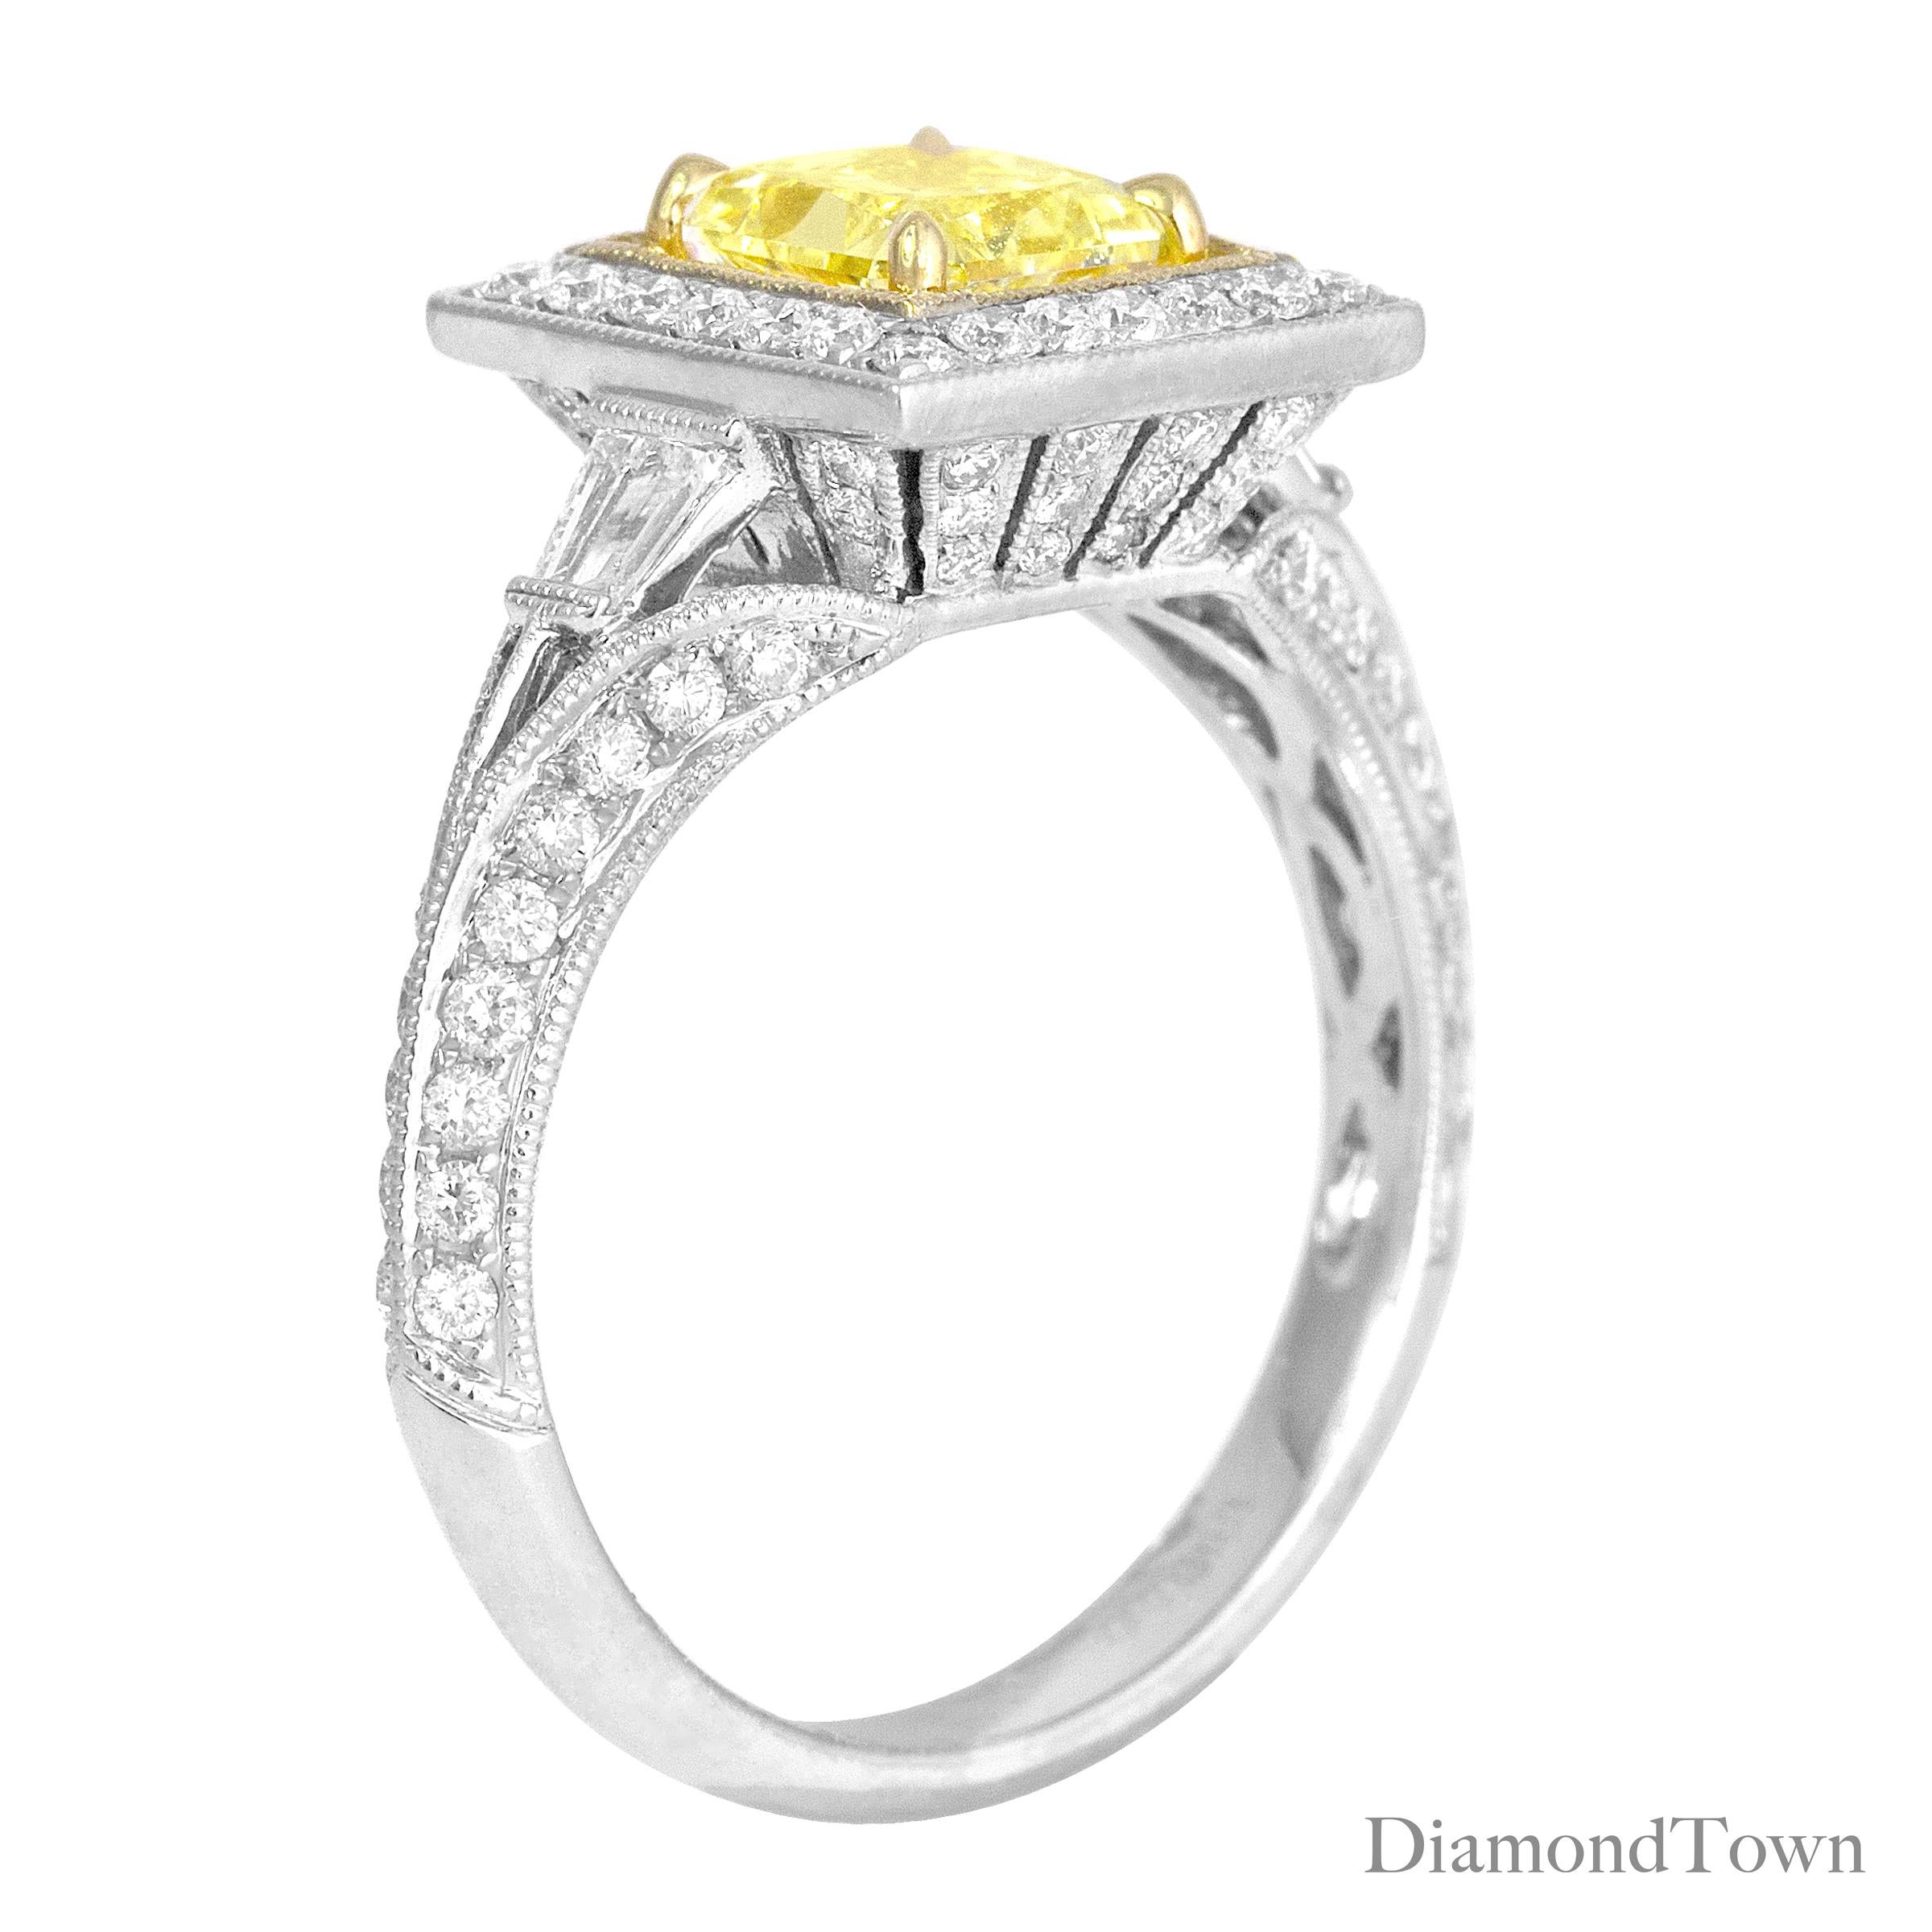 (DiamondTown) This gorgeous ring has a GIA Certified Natural Fancy Yellow SI1 Radiant Cut center measuring 1.22 carats, surrounded by a halo of round white diamonds. Additional diamonds decorate the side shank.

Center: 1.22 Carat Radiant Cut,